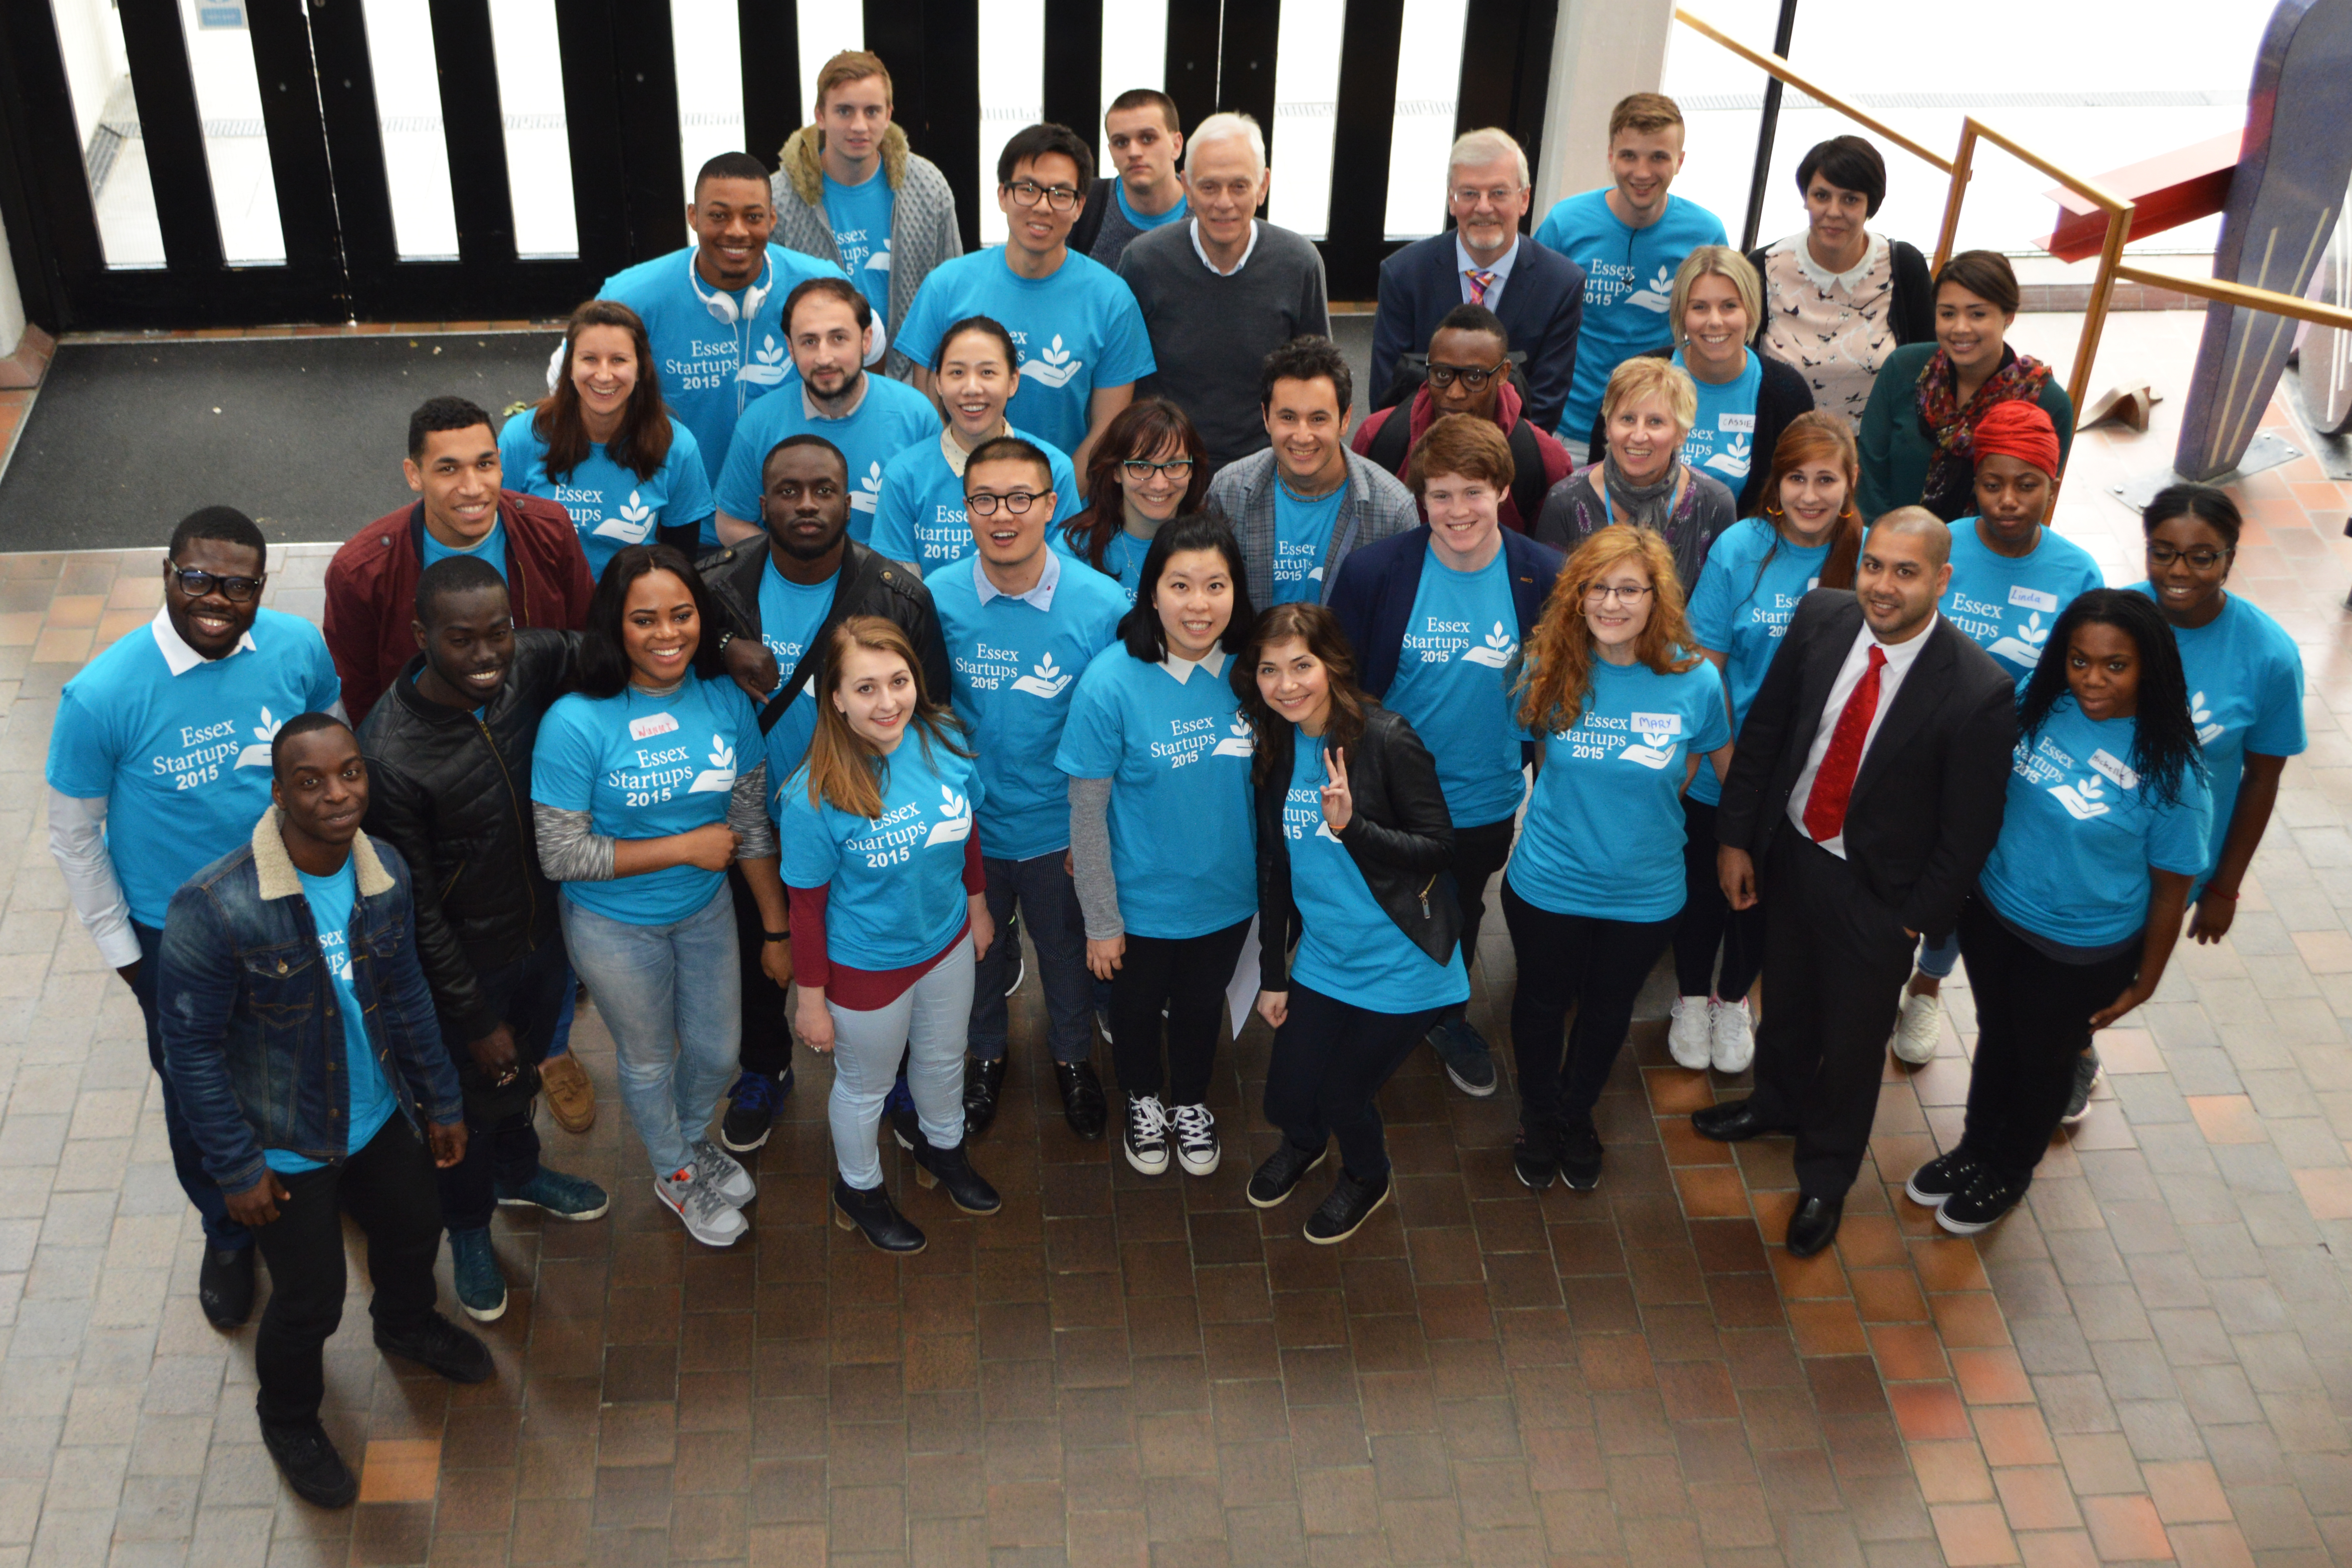 A photograph shows a group of people, made up of younger and older people, wearing shirts that read, Essex Startups 20 15.